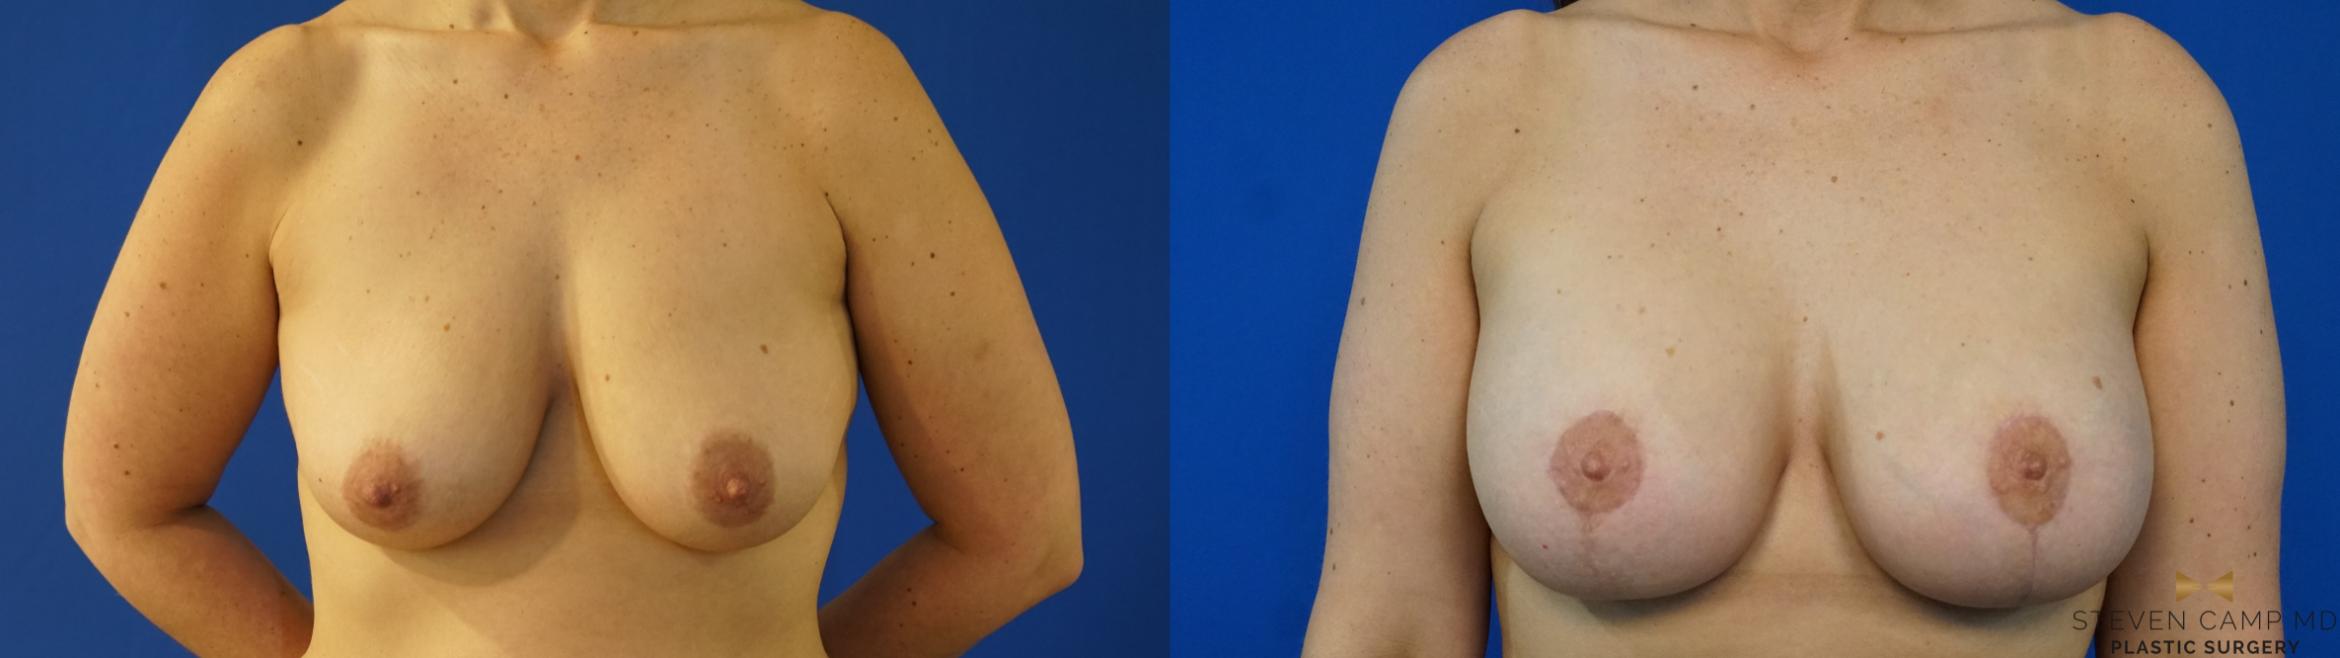 Breast Lift with or without Implants Before & After Photo | Fort Worth, Texas | Steven Camp MD Plastic Surgery